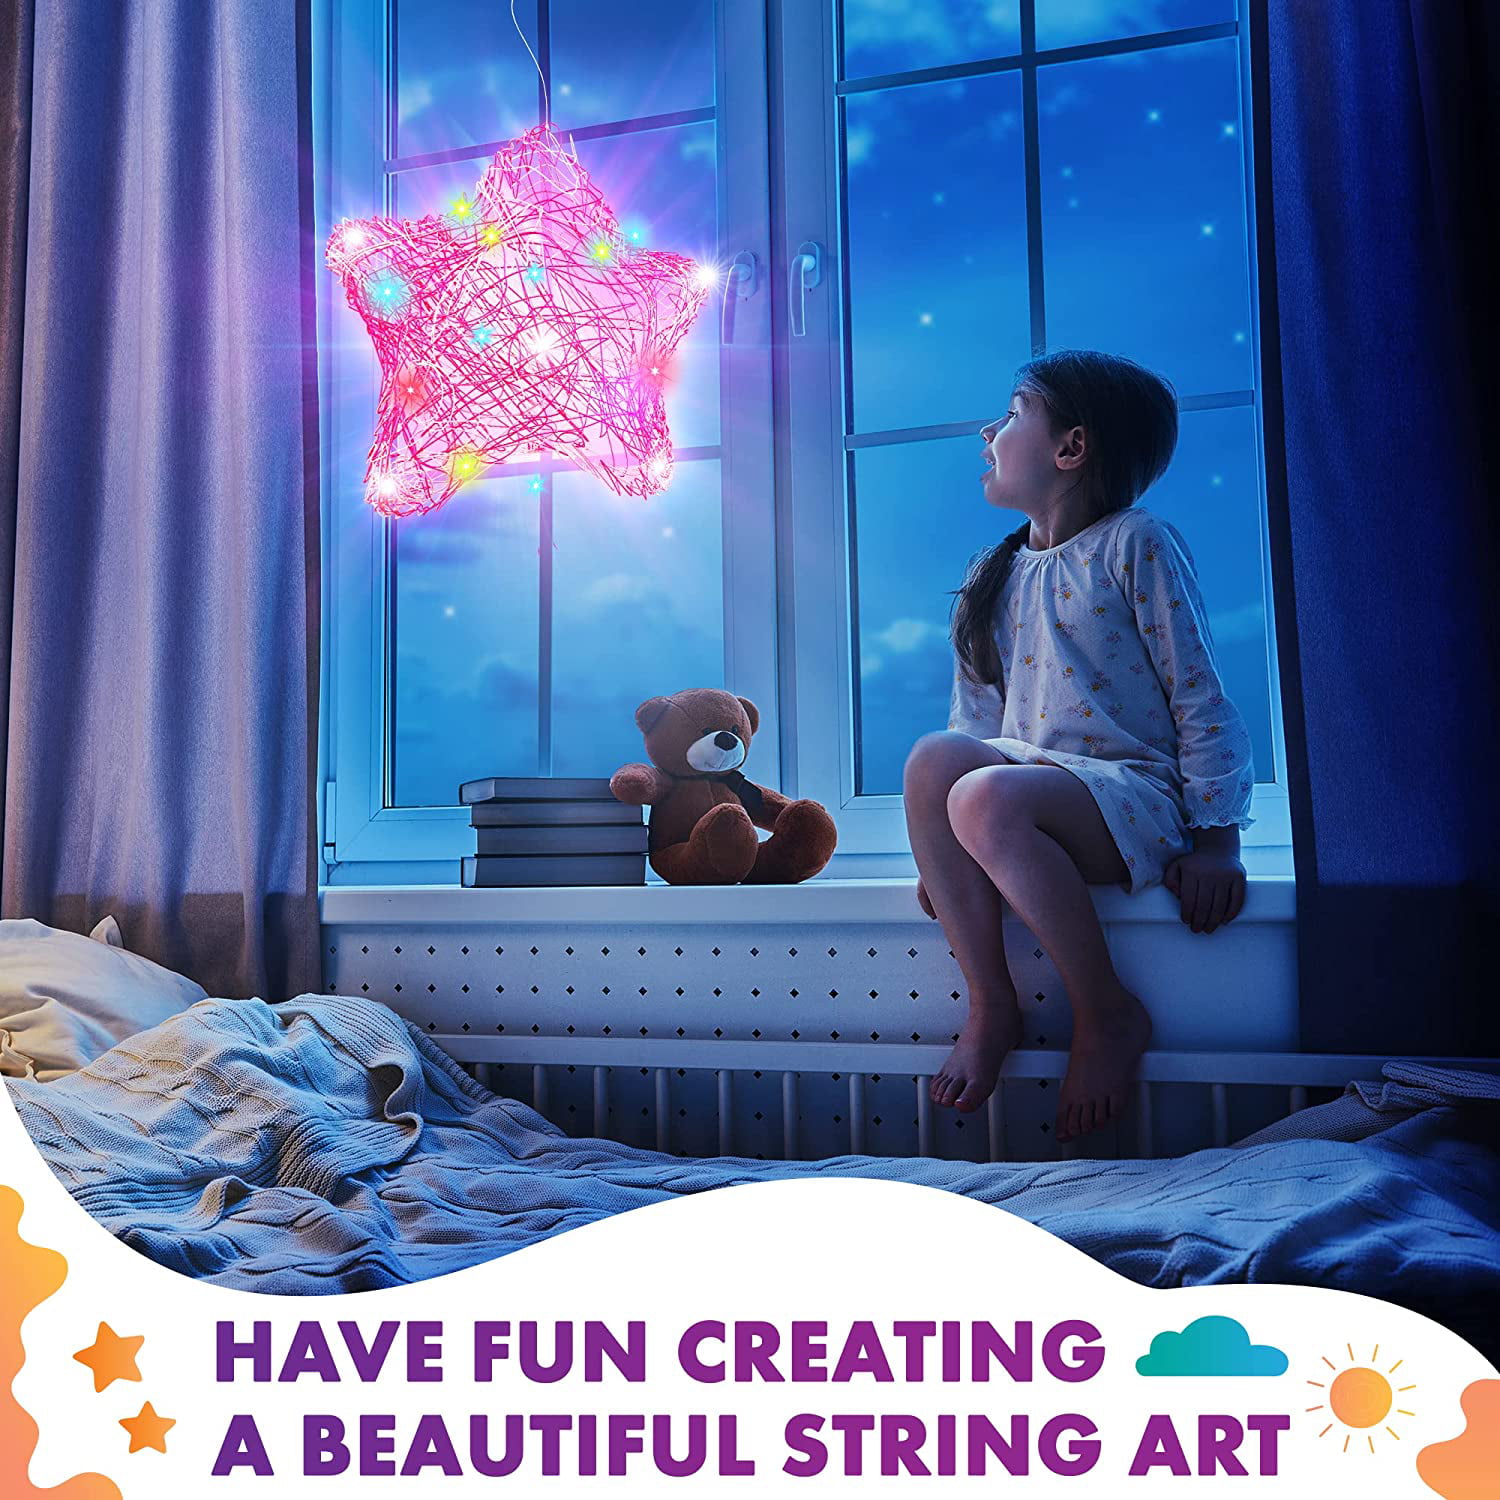 Loiion 3D String Art Kit for Kids-Arts and Crafts for Girls Ages 8-12,Makes  Light-Up Lanterns with Light, Ideas Toys for Girls, Birthday Gifts for